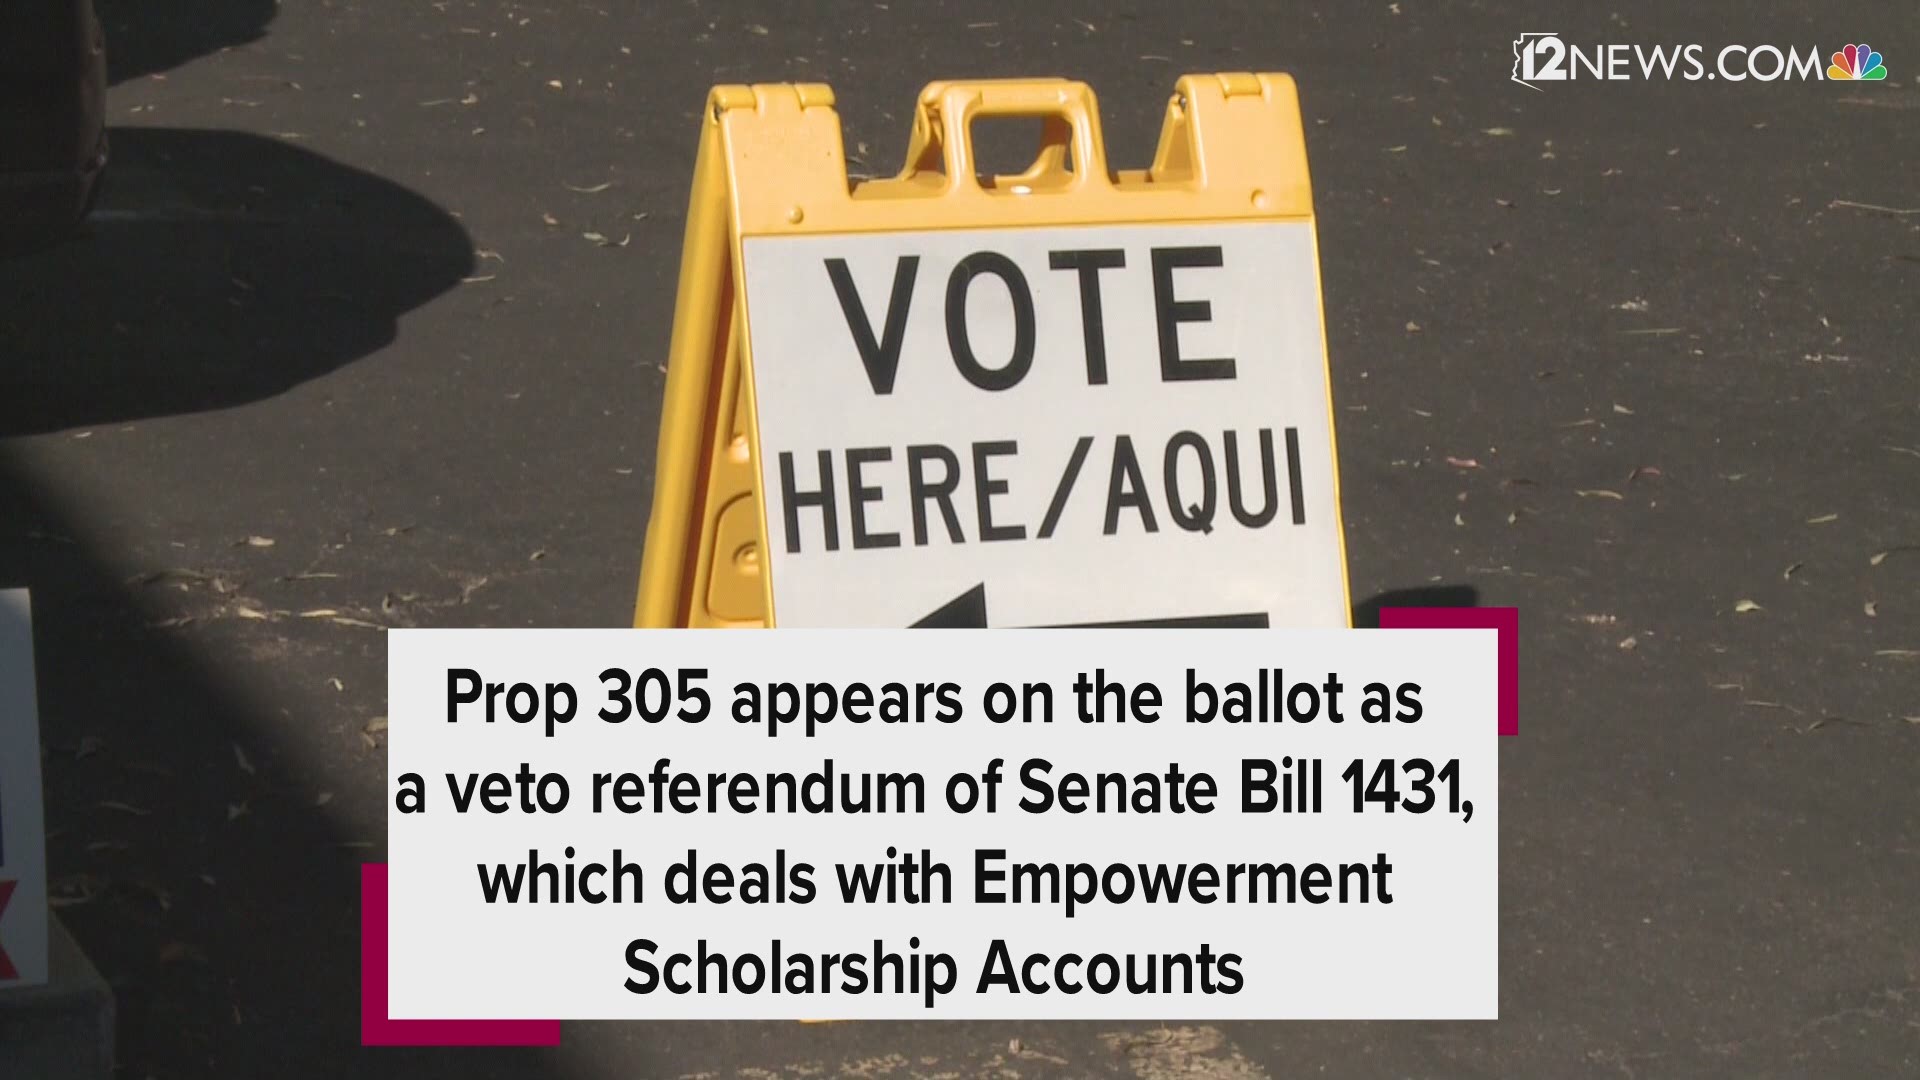 What Could prop.305 Do To Make You Switch?